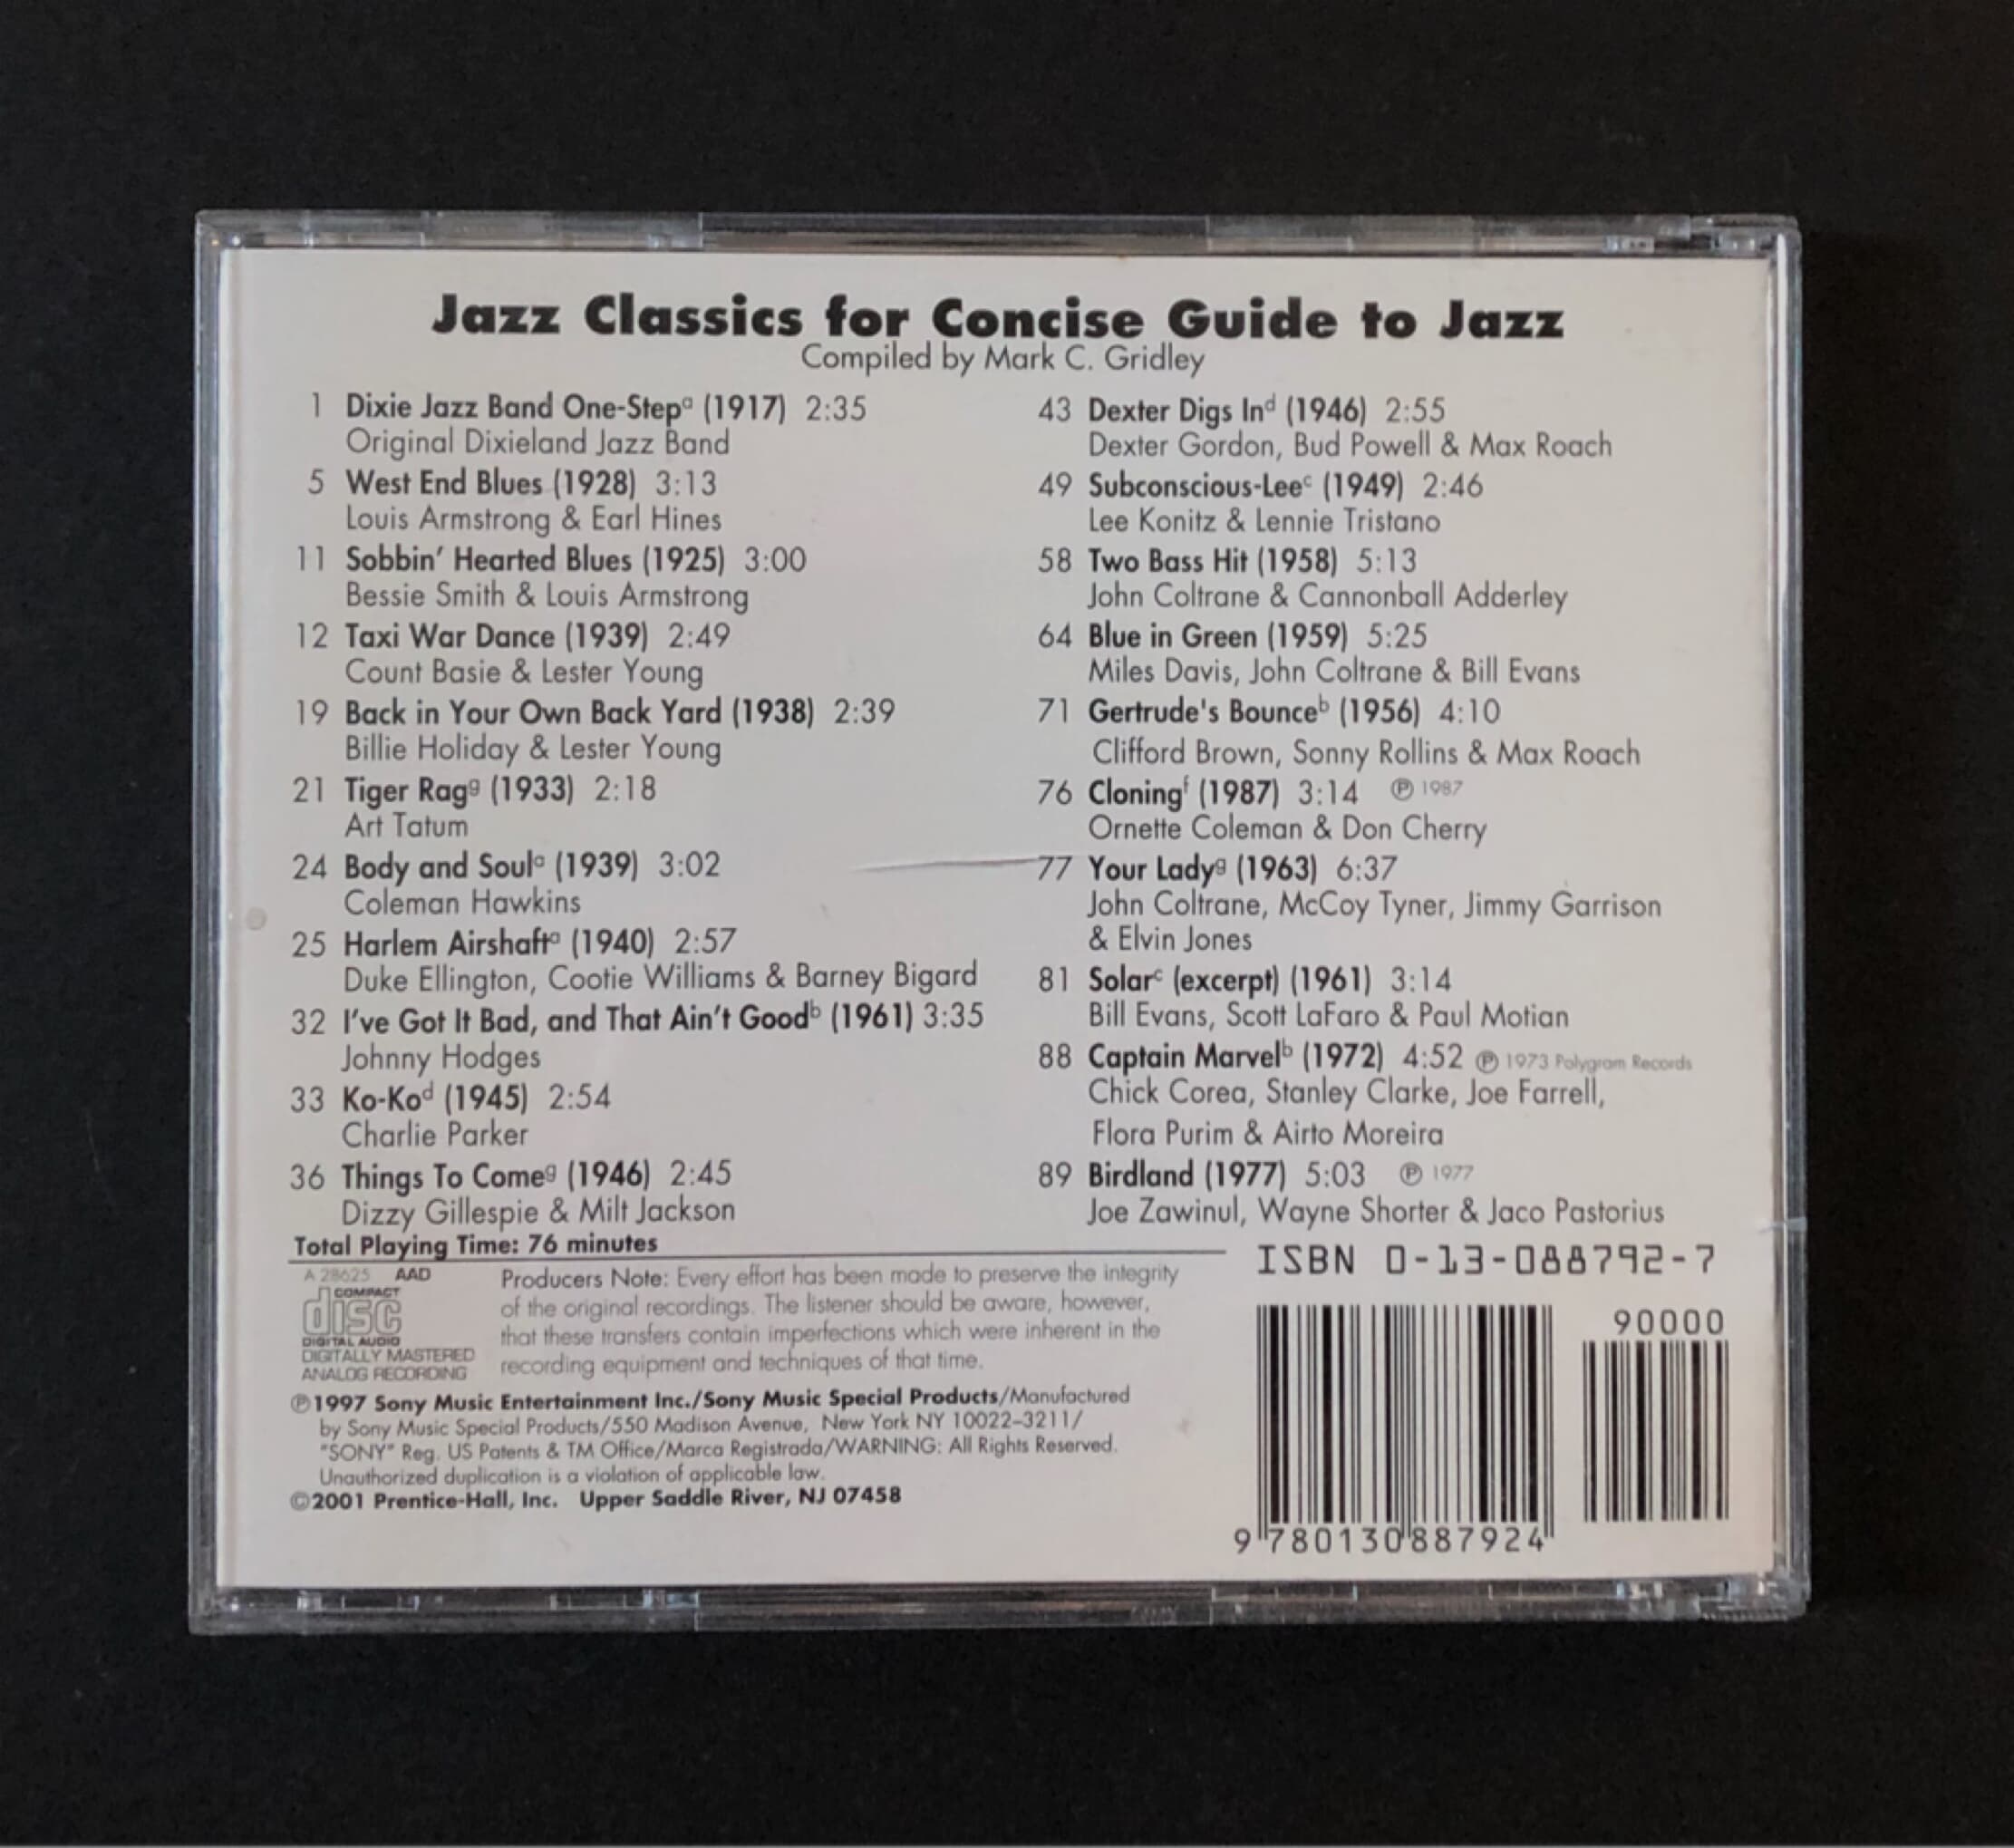 [CD] 수입반 CONCISE GUIDE TO JAZZ (US발매)